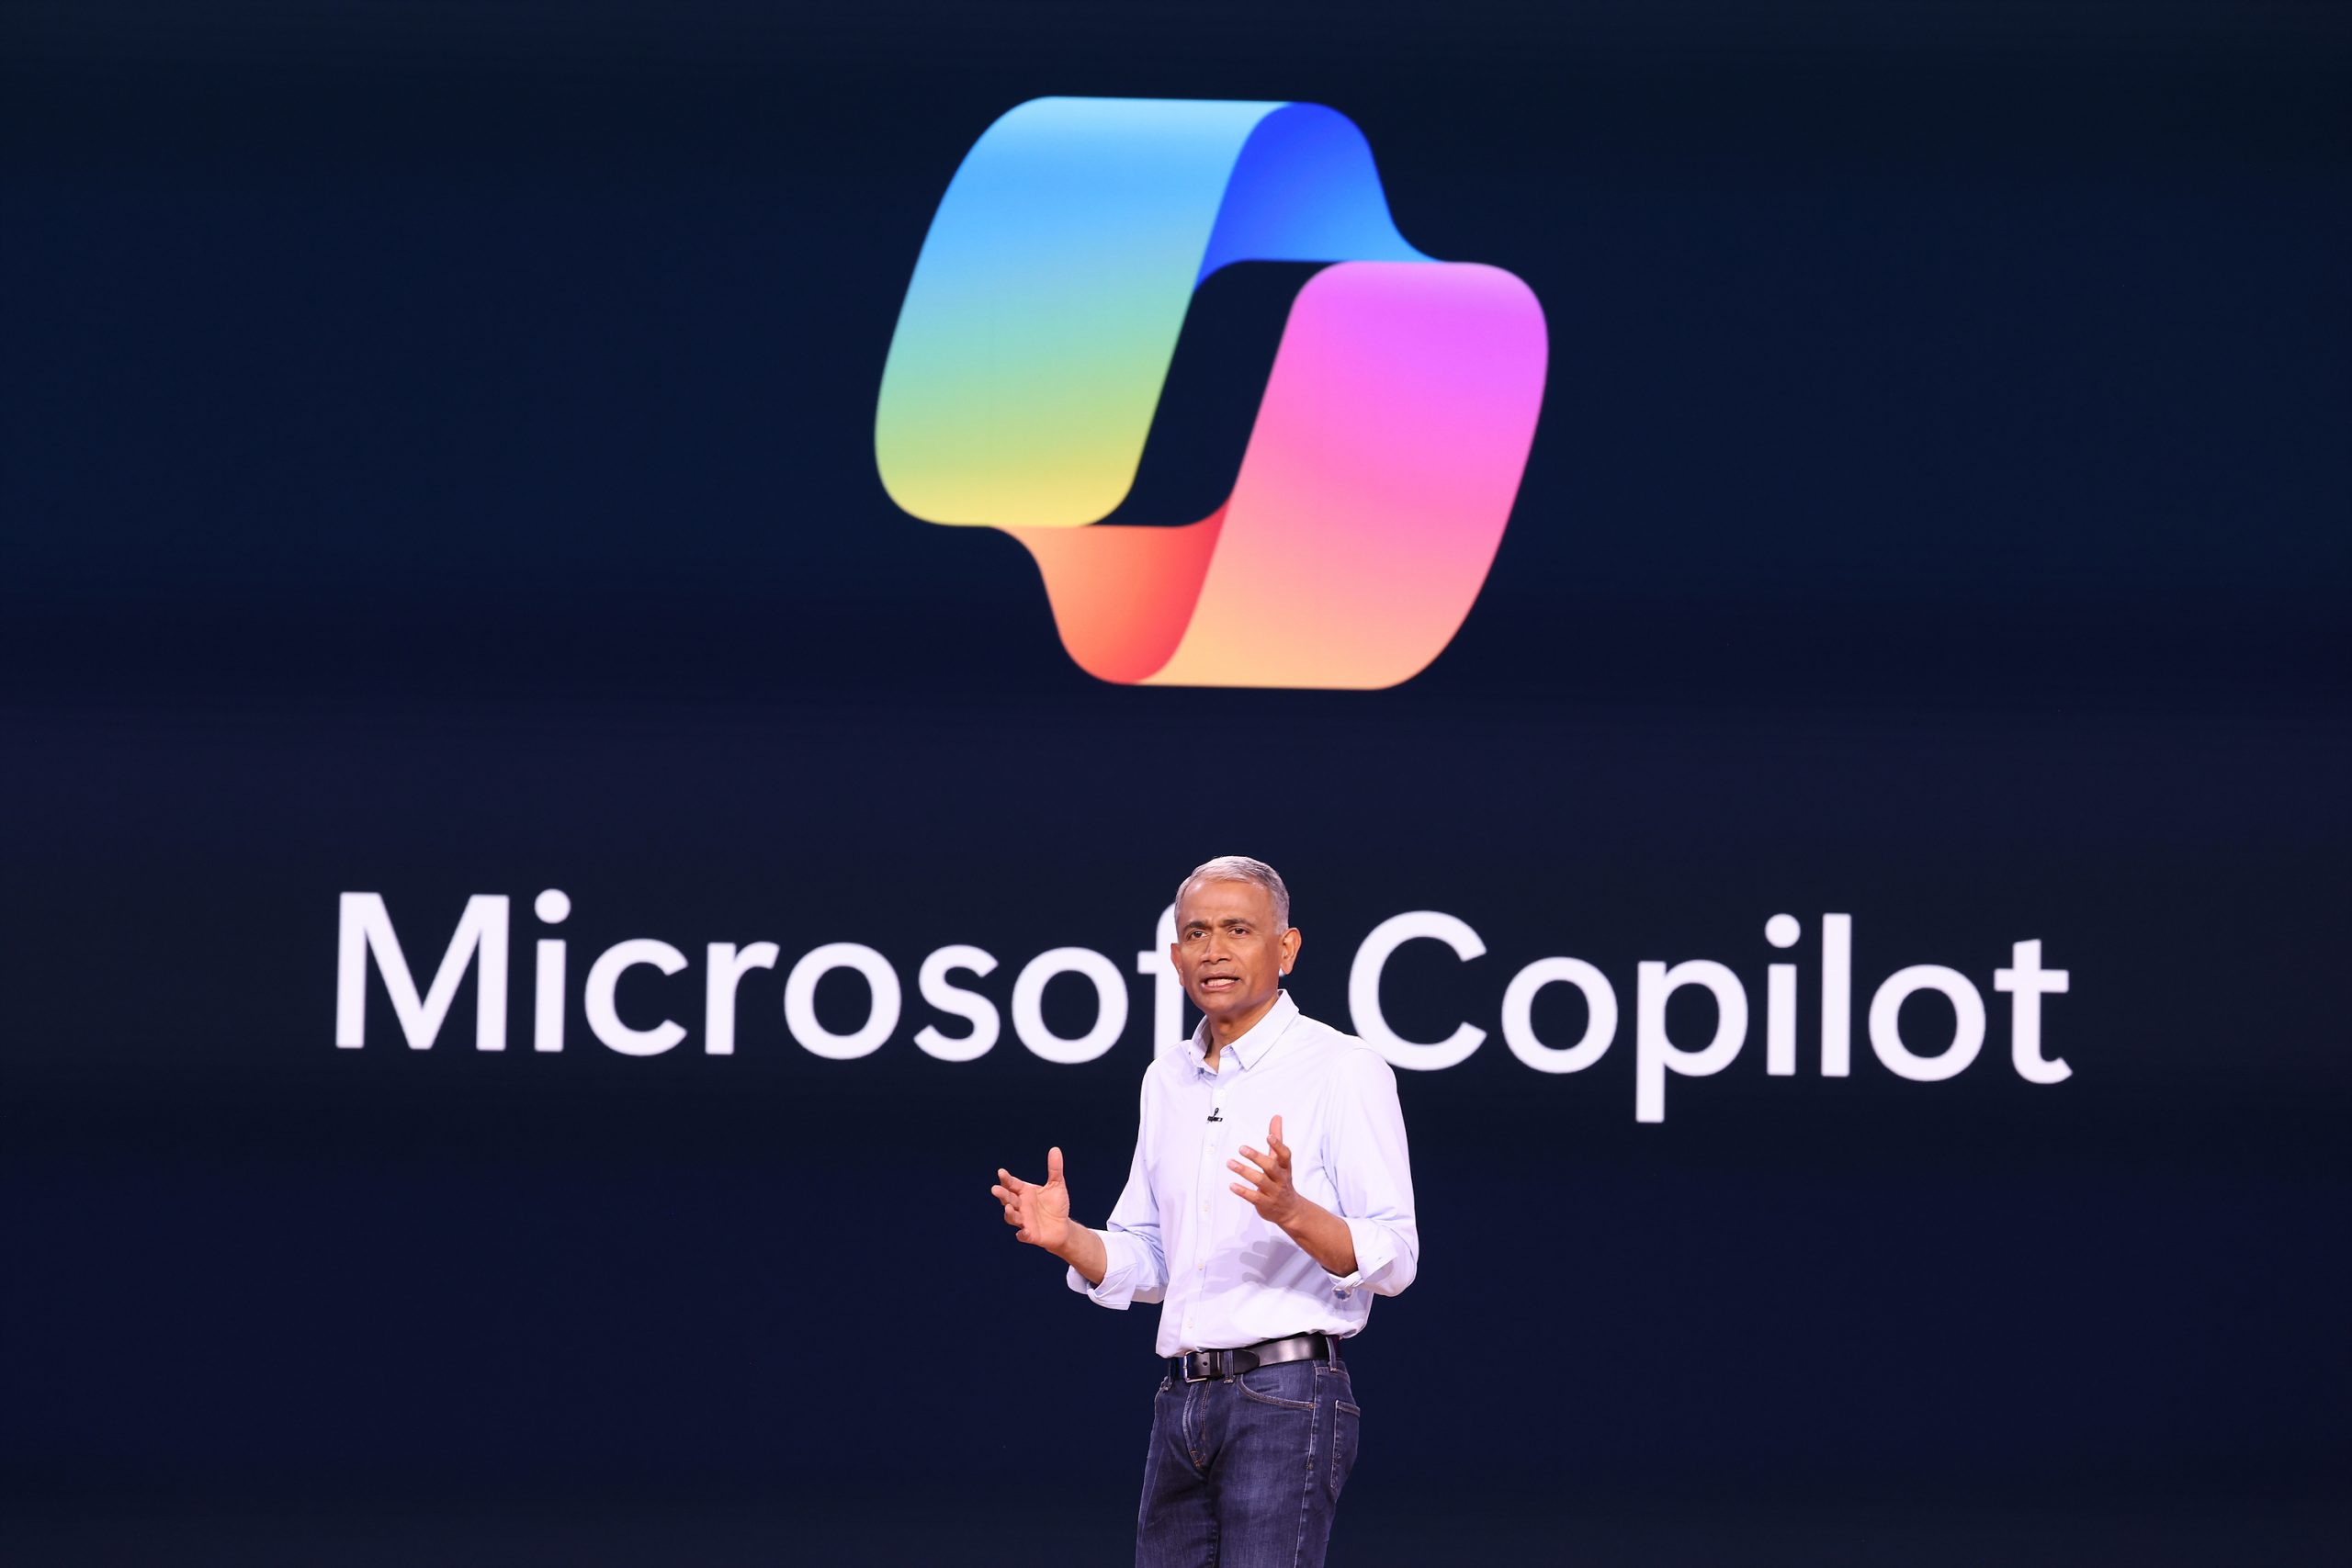 A man standing on stage with the Microsoft Copilot logo on a screen behind him